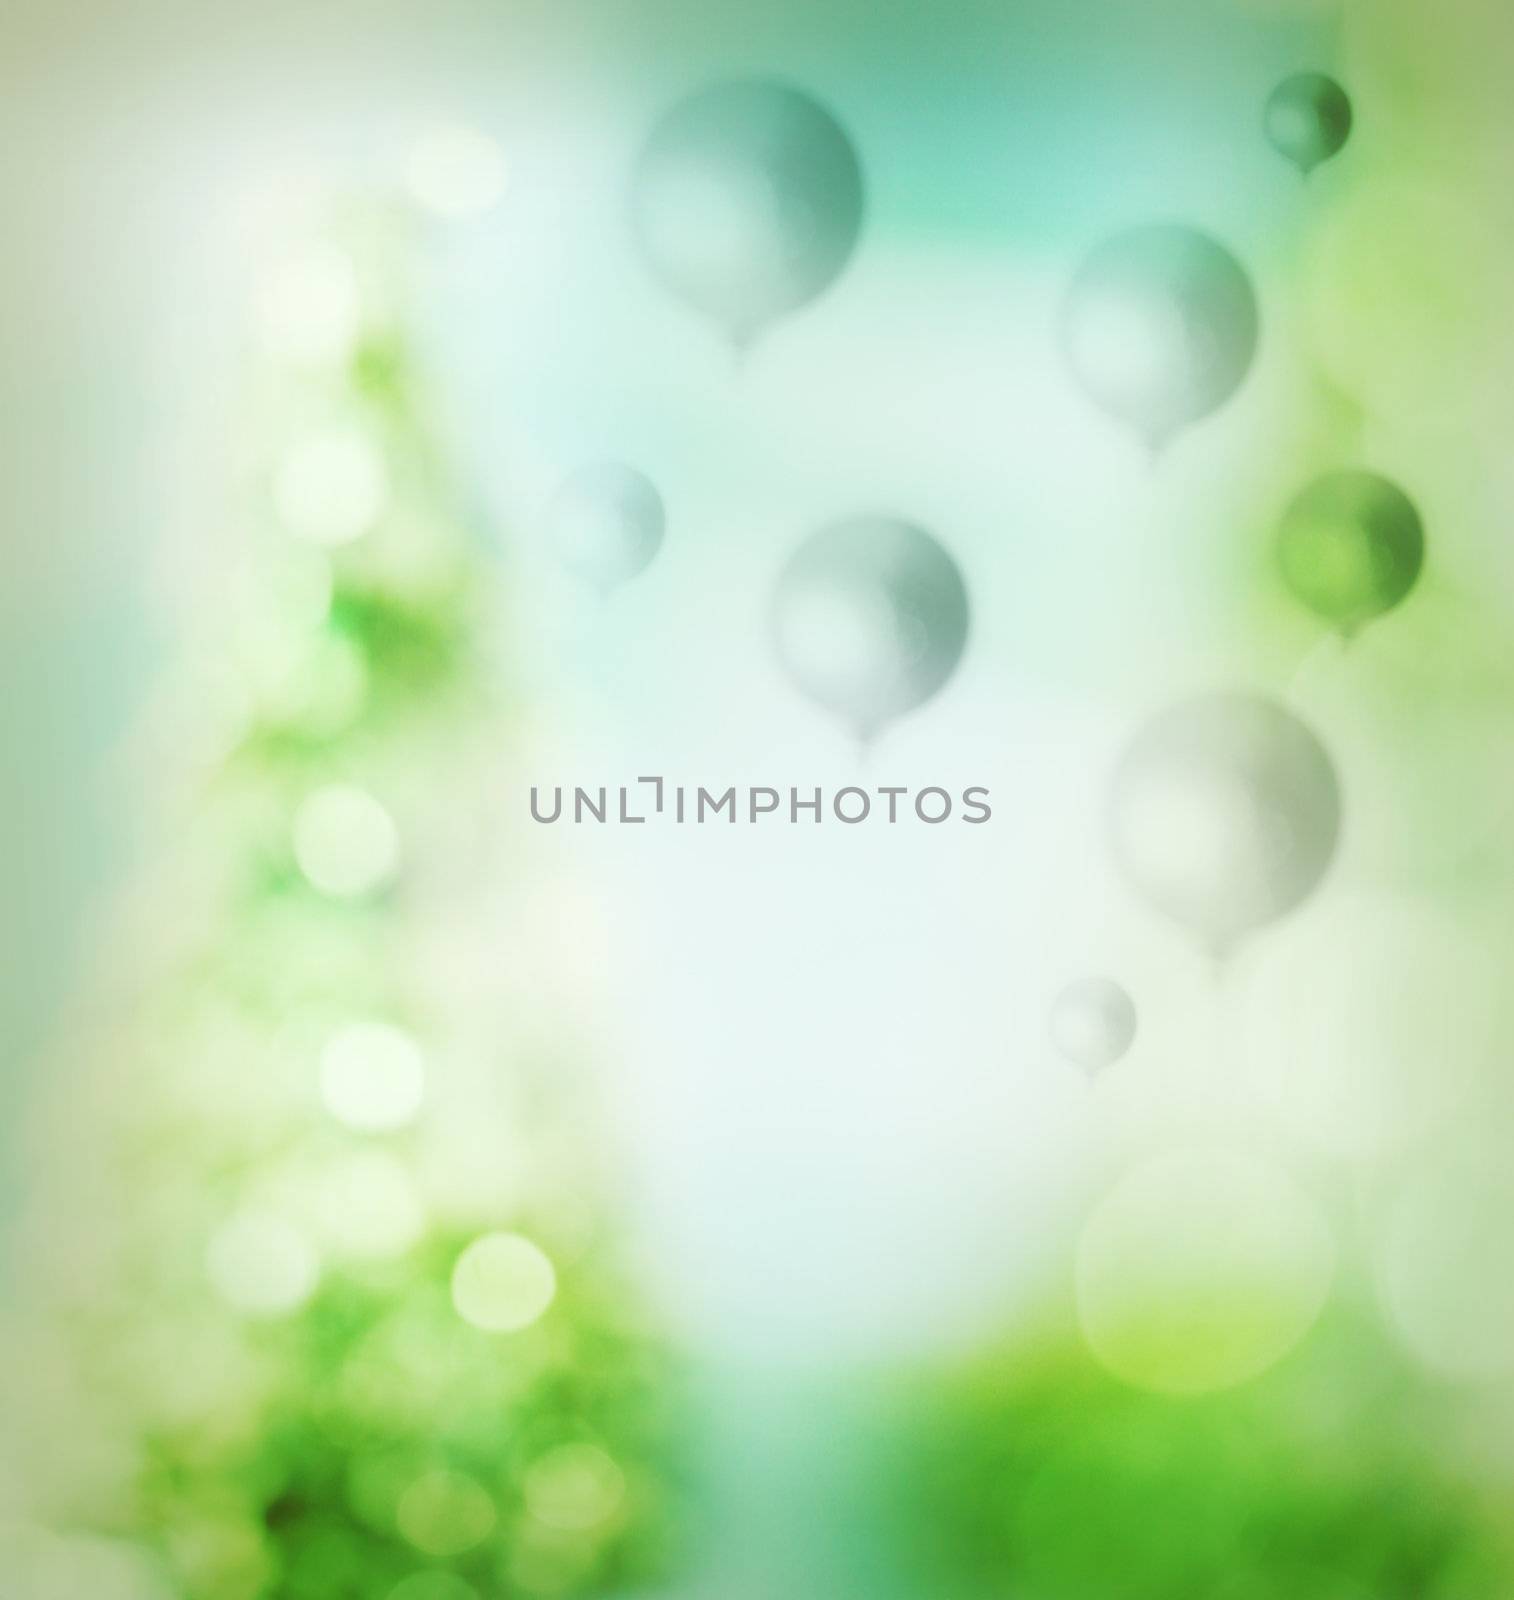 Green balloons over soft lights background